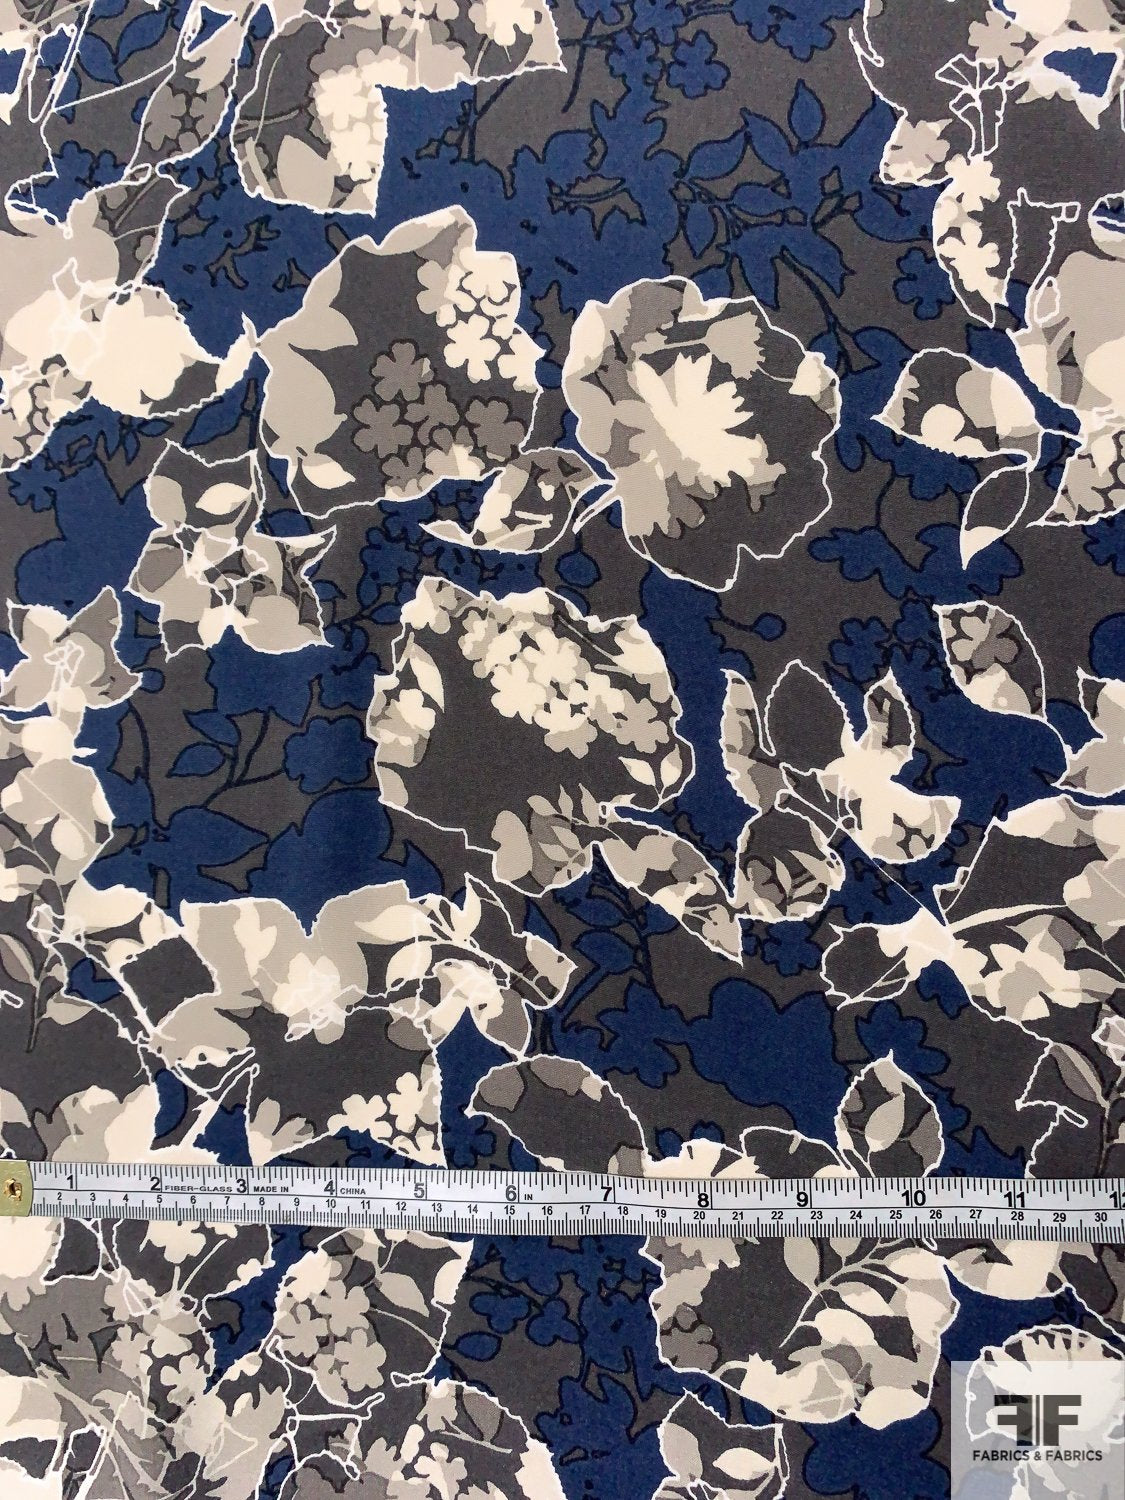 Floral Sketch Silhouette Printed Silk Crepe de Chine - Dusk Navy / Grets / White